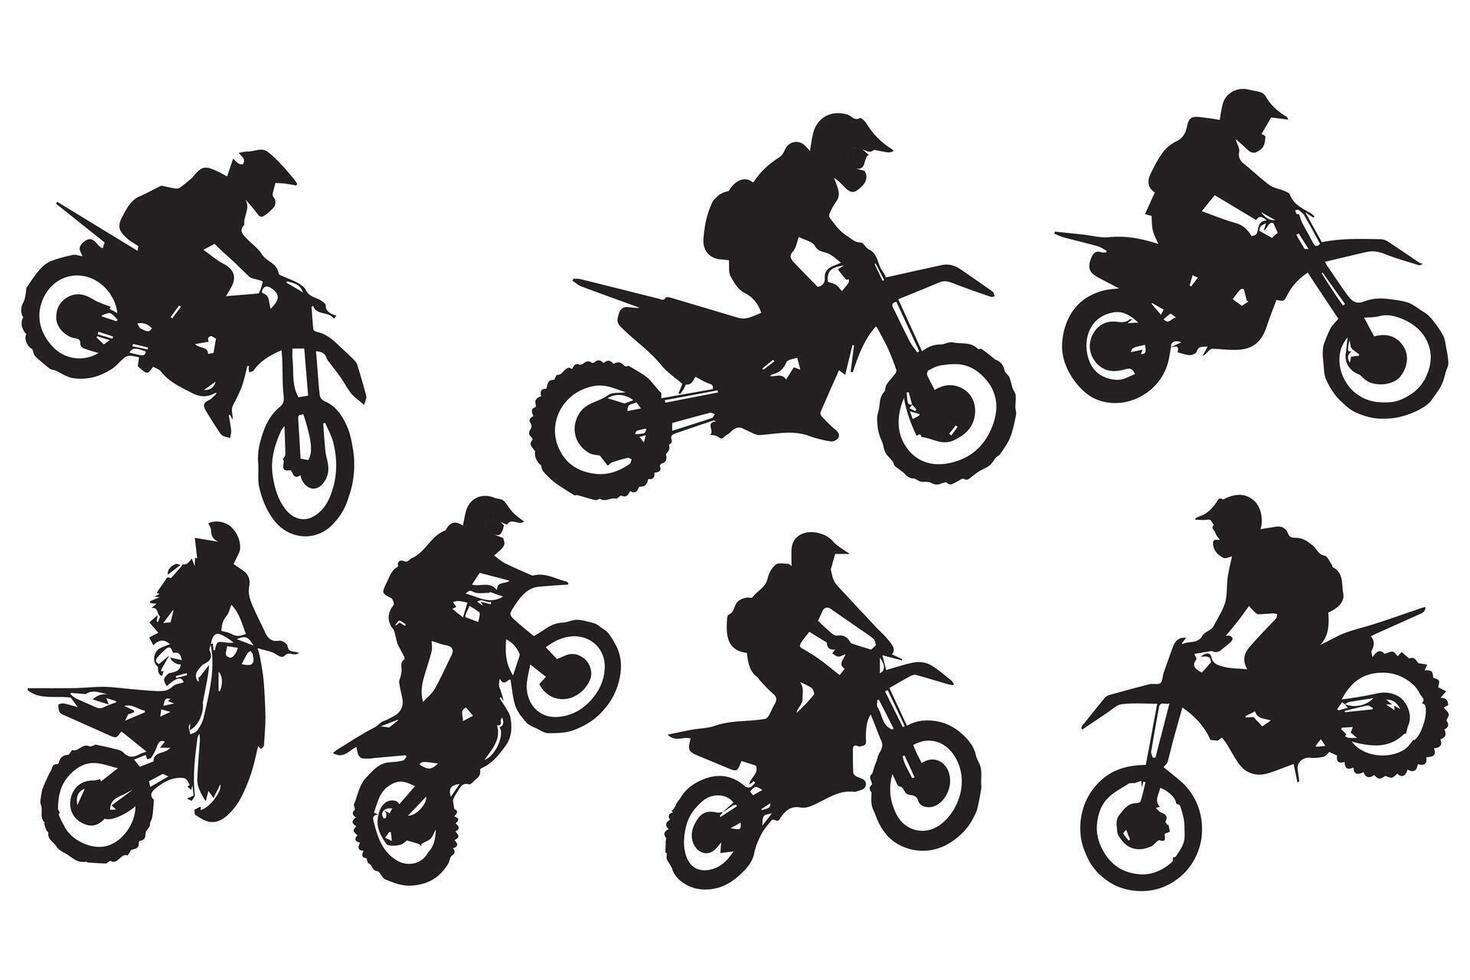 Motocross racing, motocross racer jumping on a motorcycle, isolated silhouette, front view. Ink drawing, freestyle motocross pro design vector